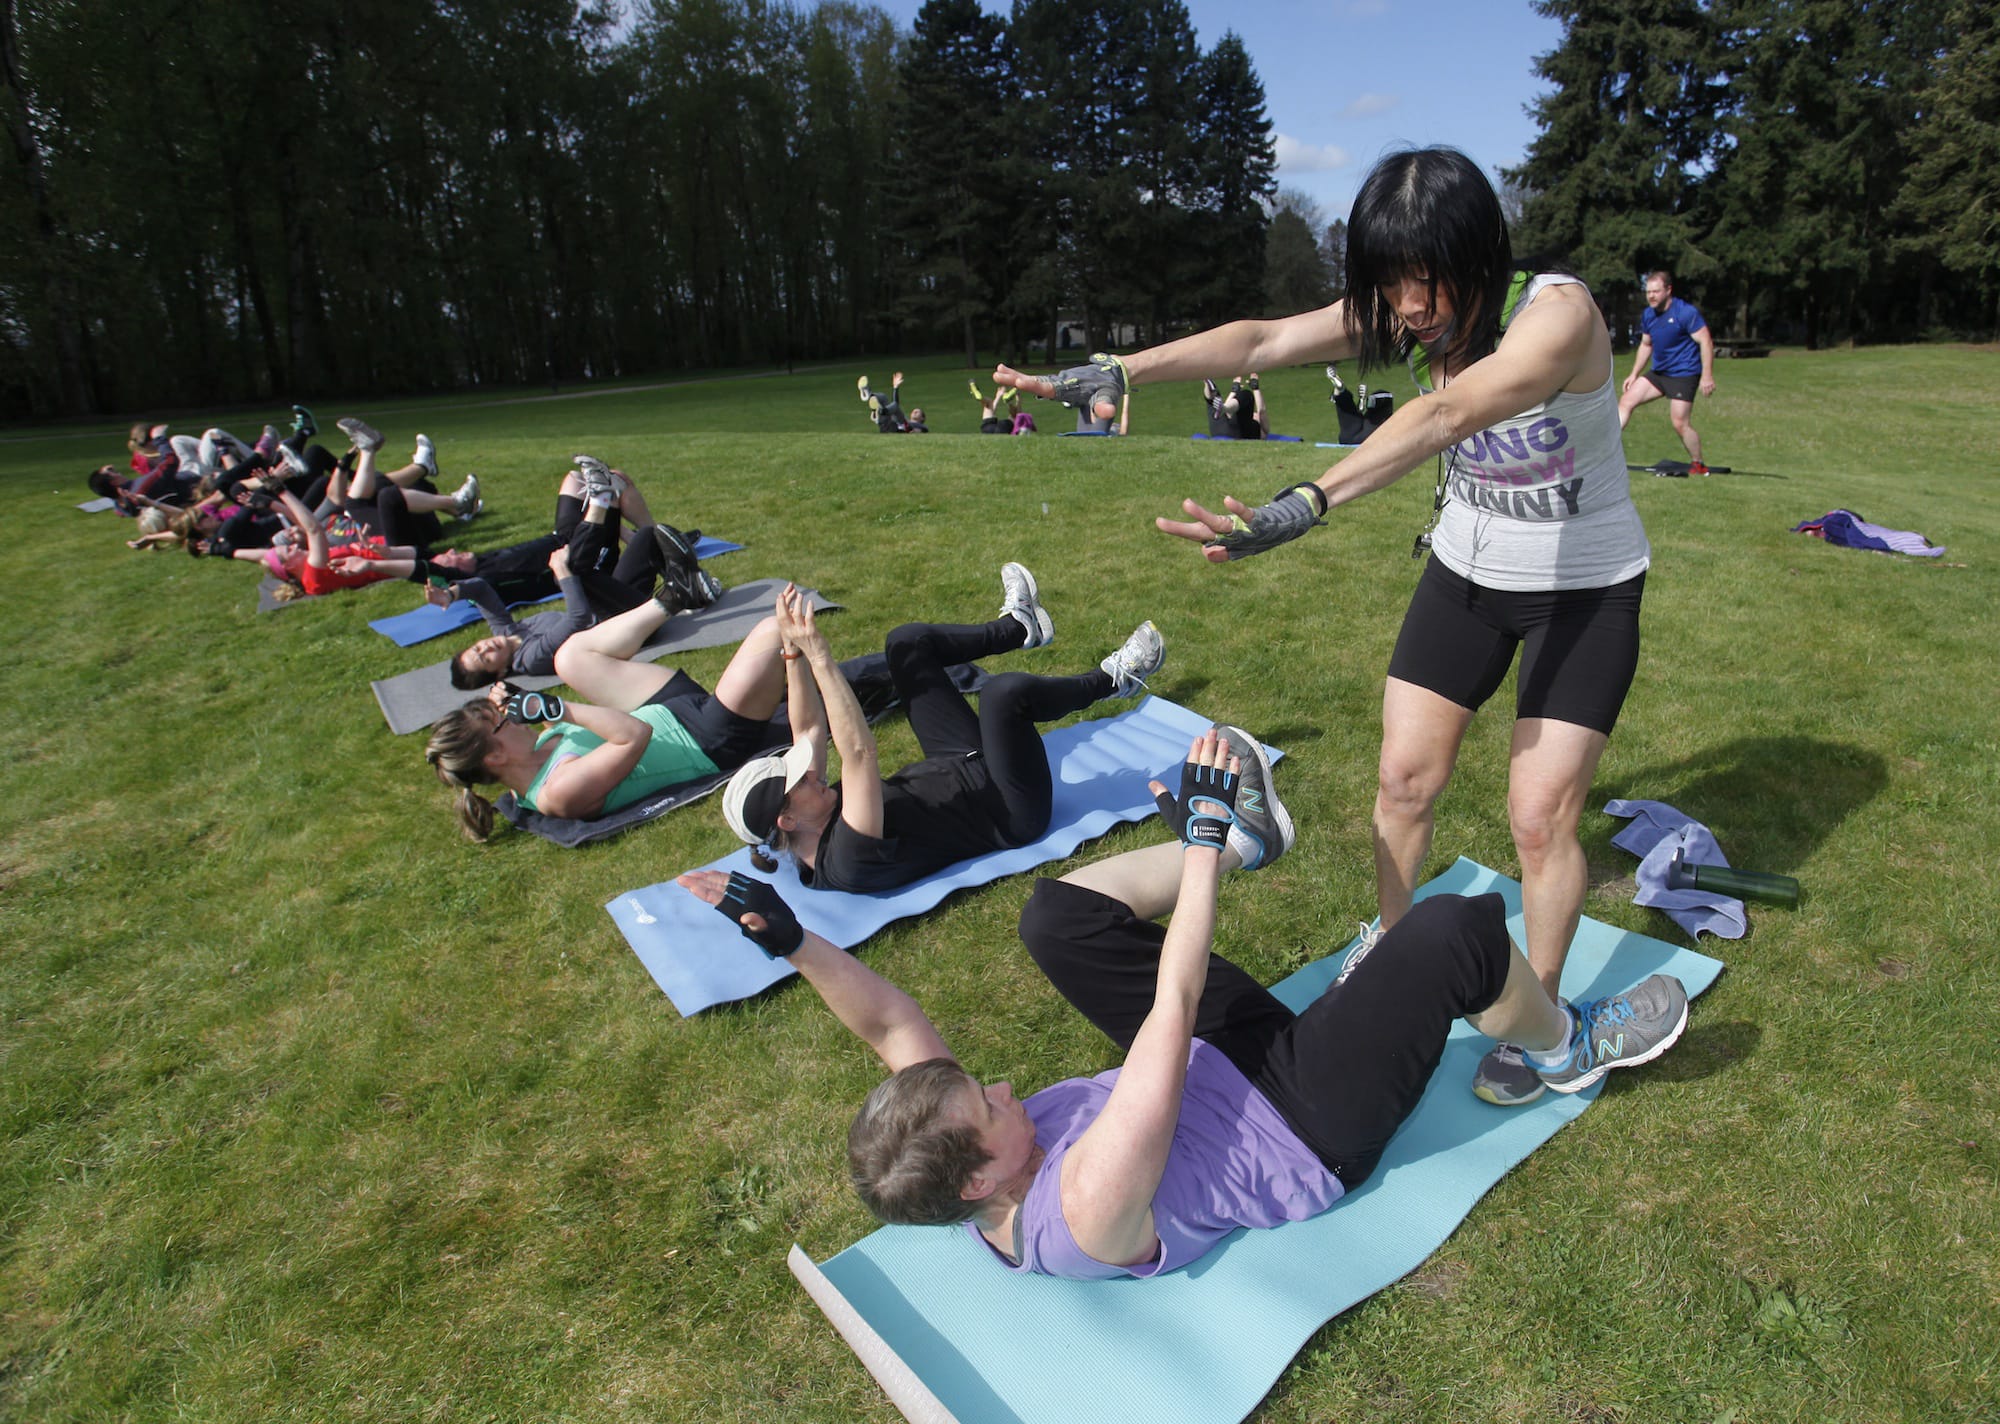 Photos by Steve Dipaola for The Columbian
May Jackson leads participants through her Be Fit Club boot camp class at Marine Park in Vancouver. Jackson hosts free boot camp classes every Saturday morning at various locations in Clark County.